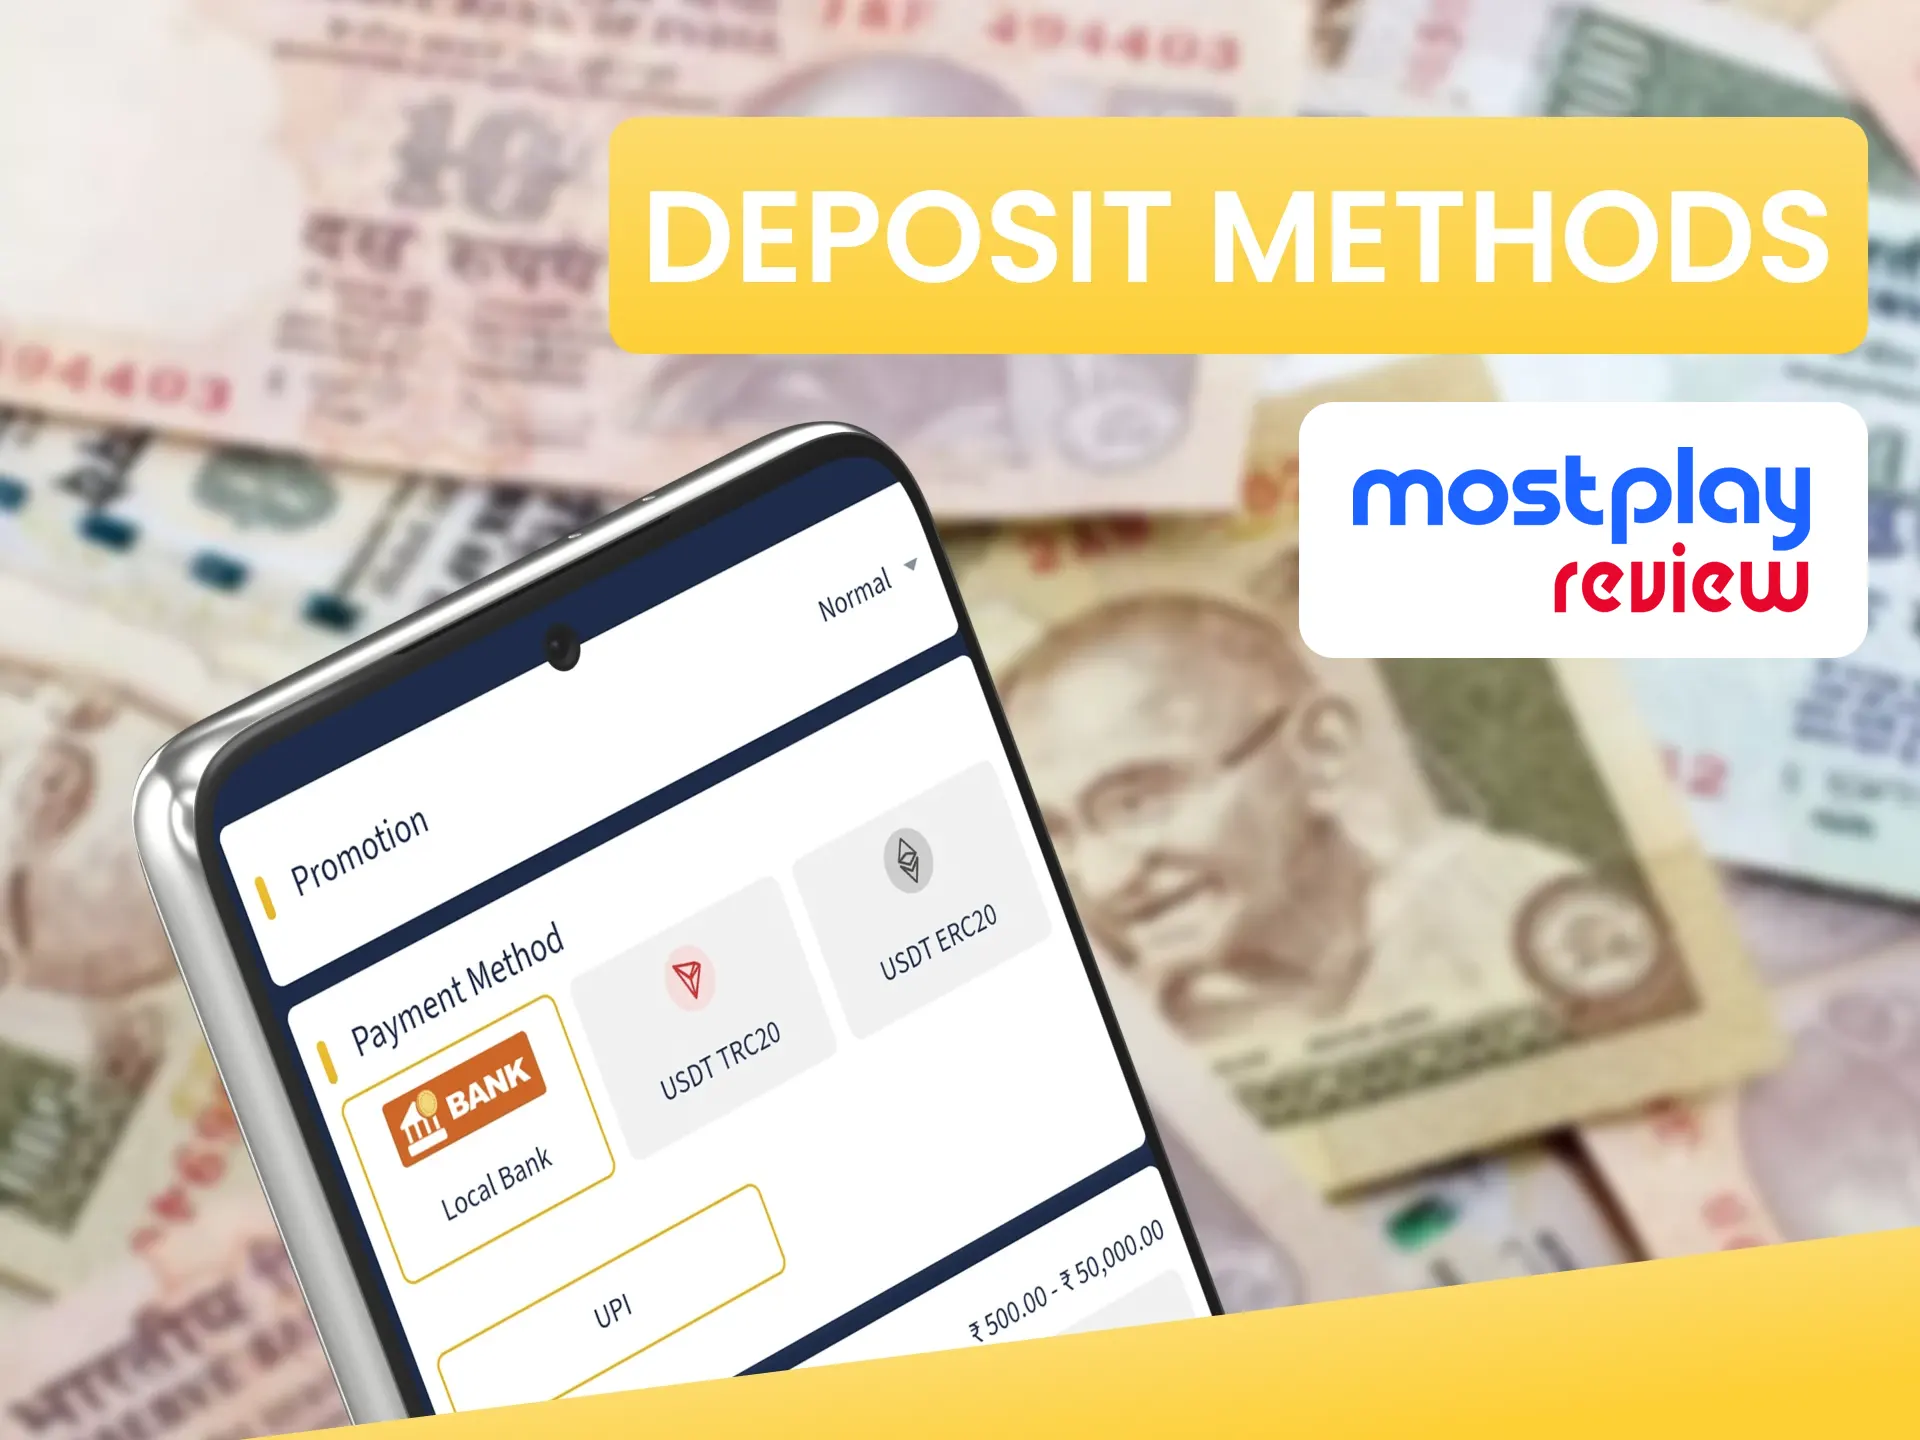 Find out what deposit methods are available on Mostplay.